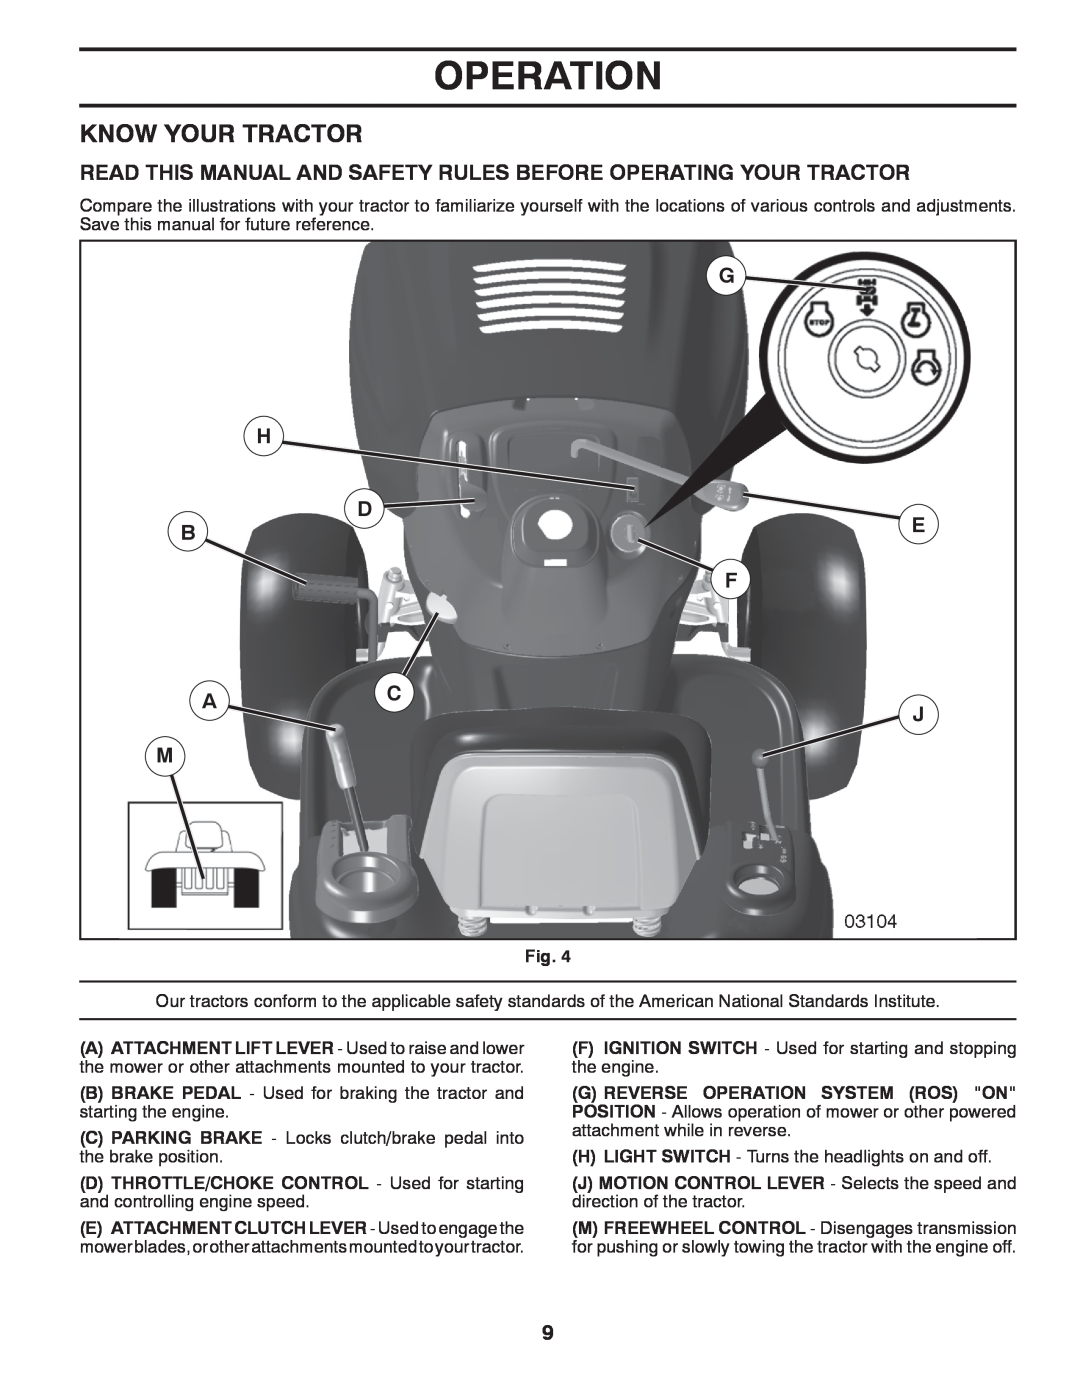 Ariens 935335 42 manual Know Your Tractor, Operation 